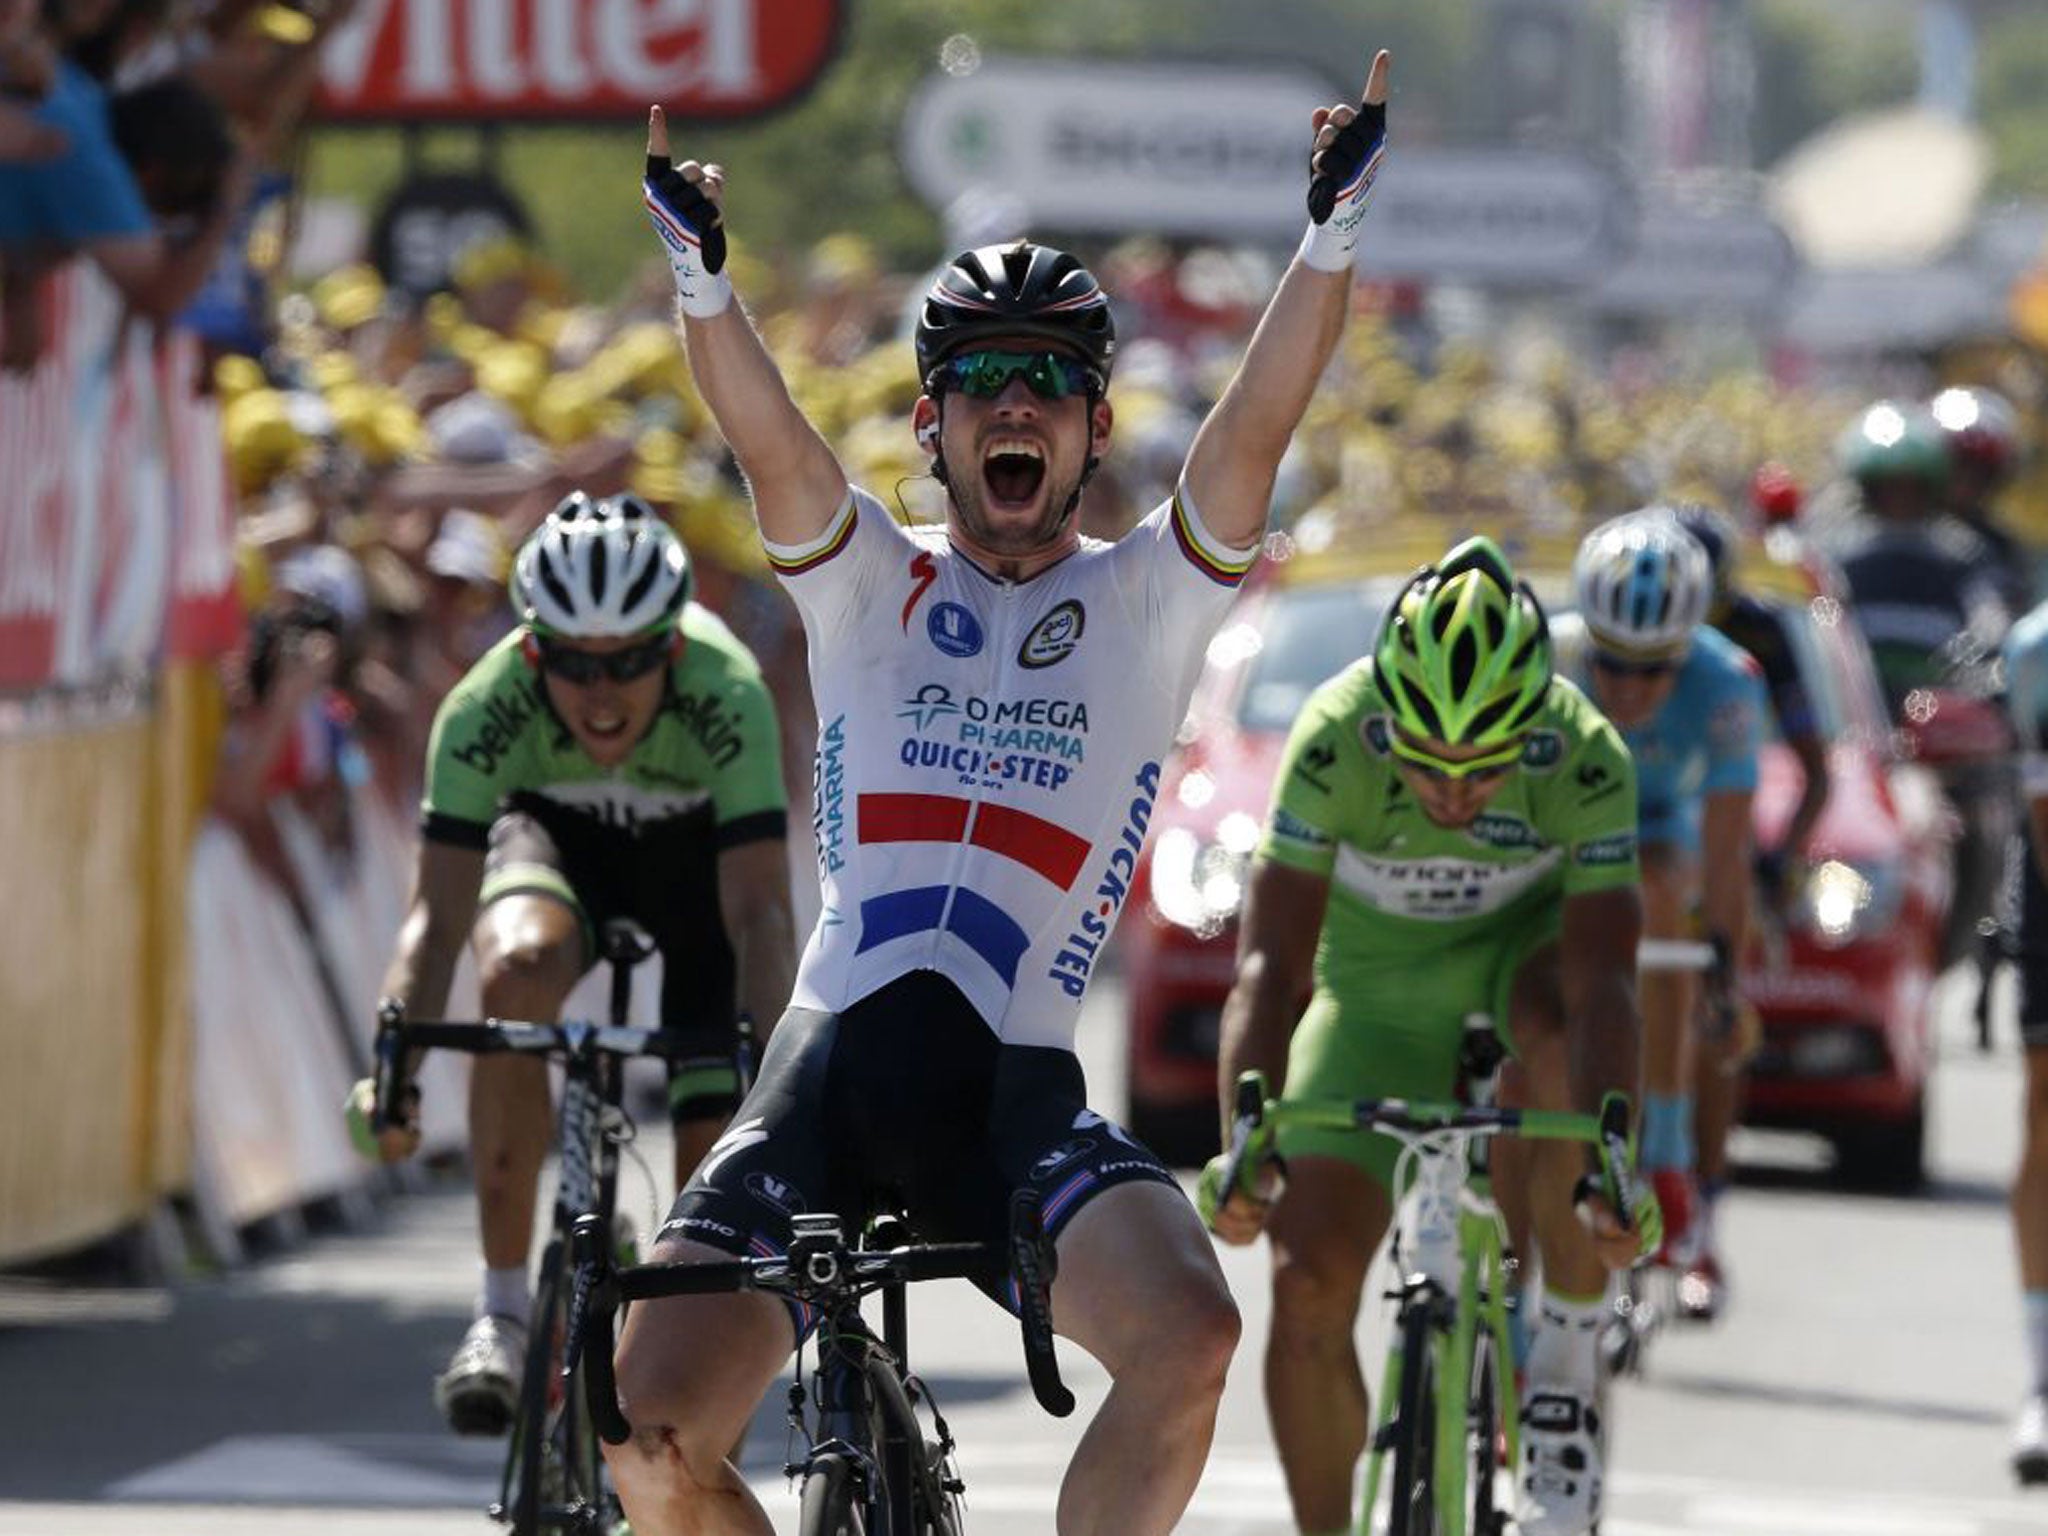 Mark Cavendish raises his arms in triumph as he wins yesterday’s 13th stage